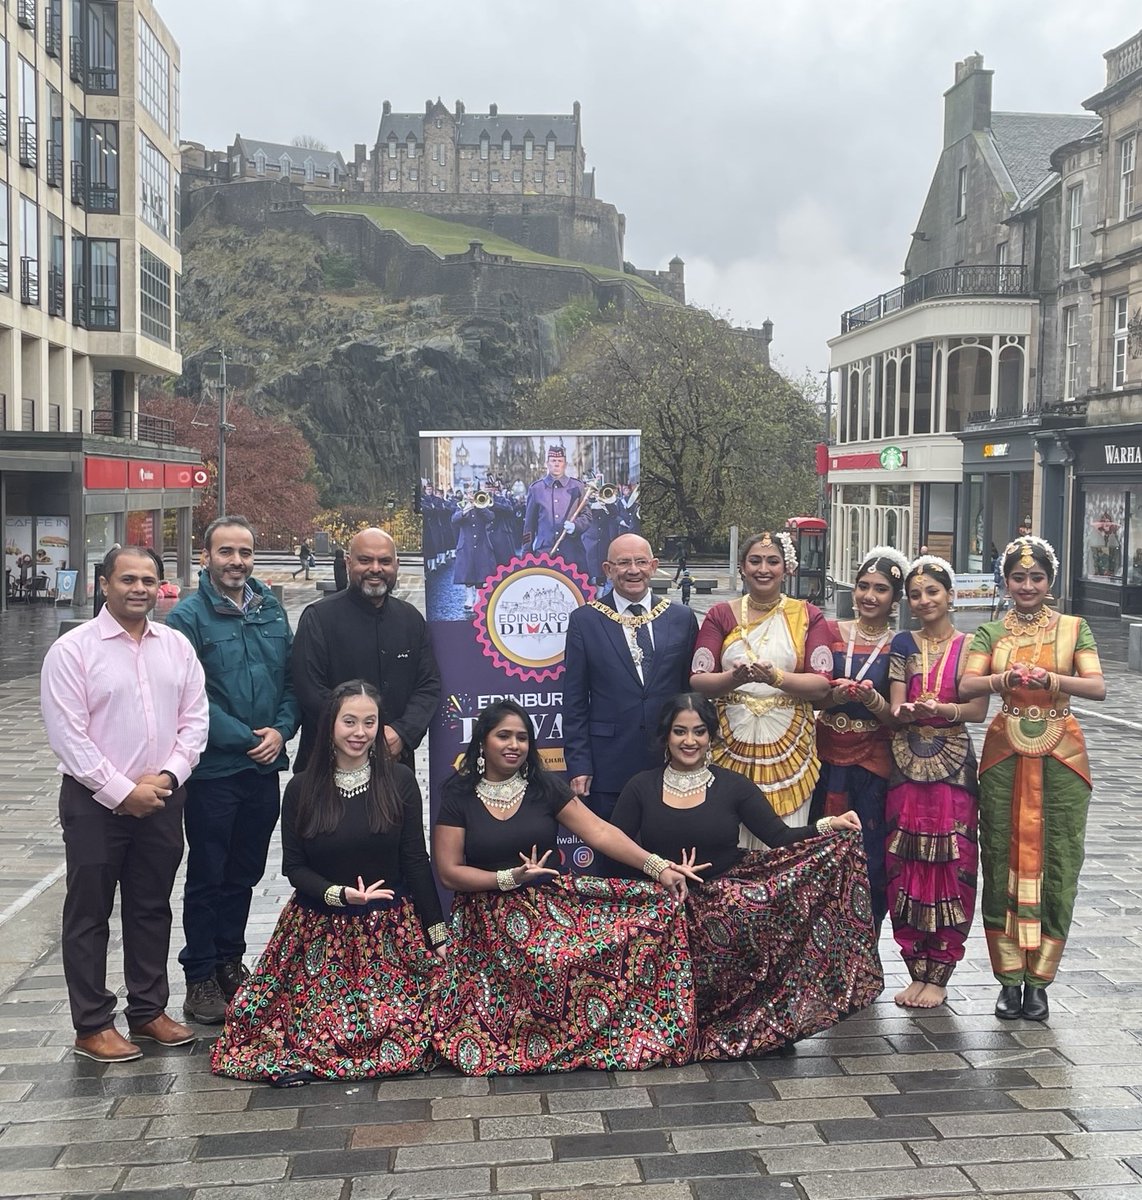 Fantastic to meet some of the organisers and performers @edinburghdiwali today. In these often dark times the 'festival of light' is more important than ever🏴󠁧󠁢󠁳󠁣󠁴󠁿🇮🇳 Find out more here and make sure to come along this Sunday (November 19): edinburghdiwali.co.uk